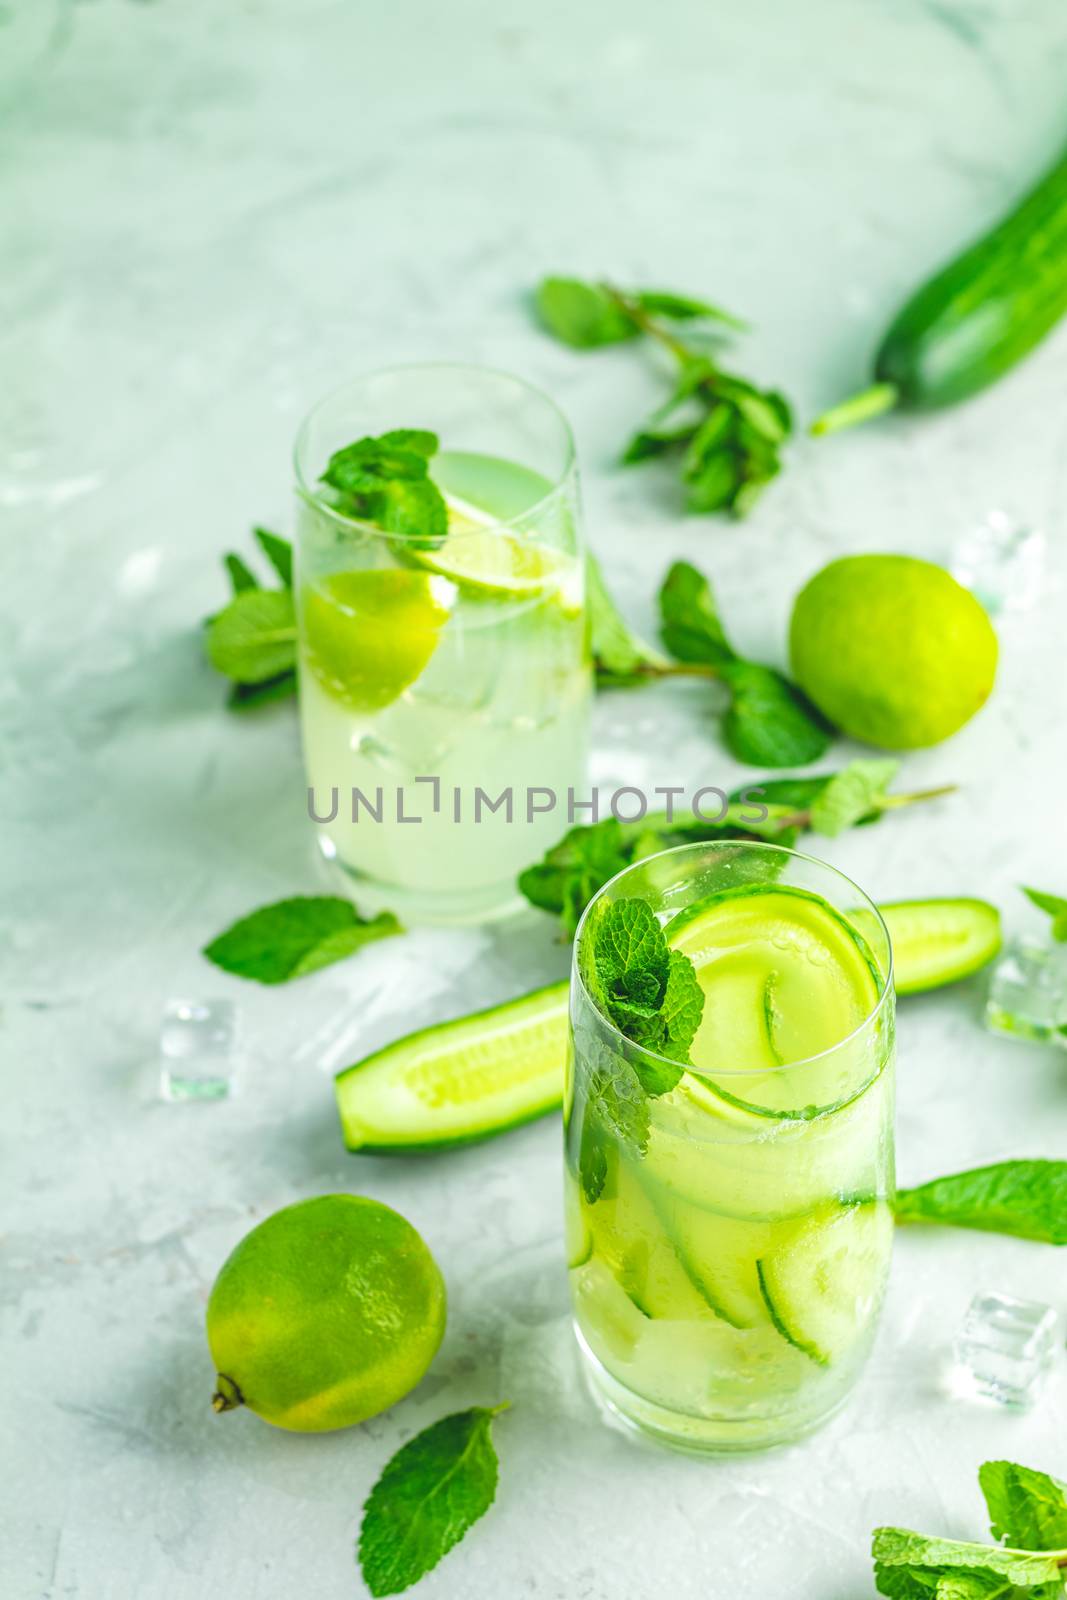 Detox cocktail of cucumber and mojito cocktail by ArtSvitlyna